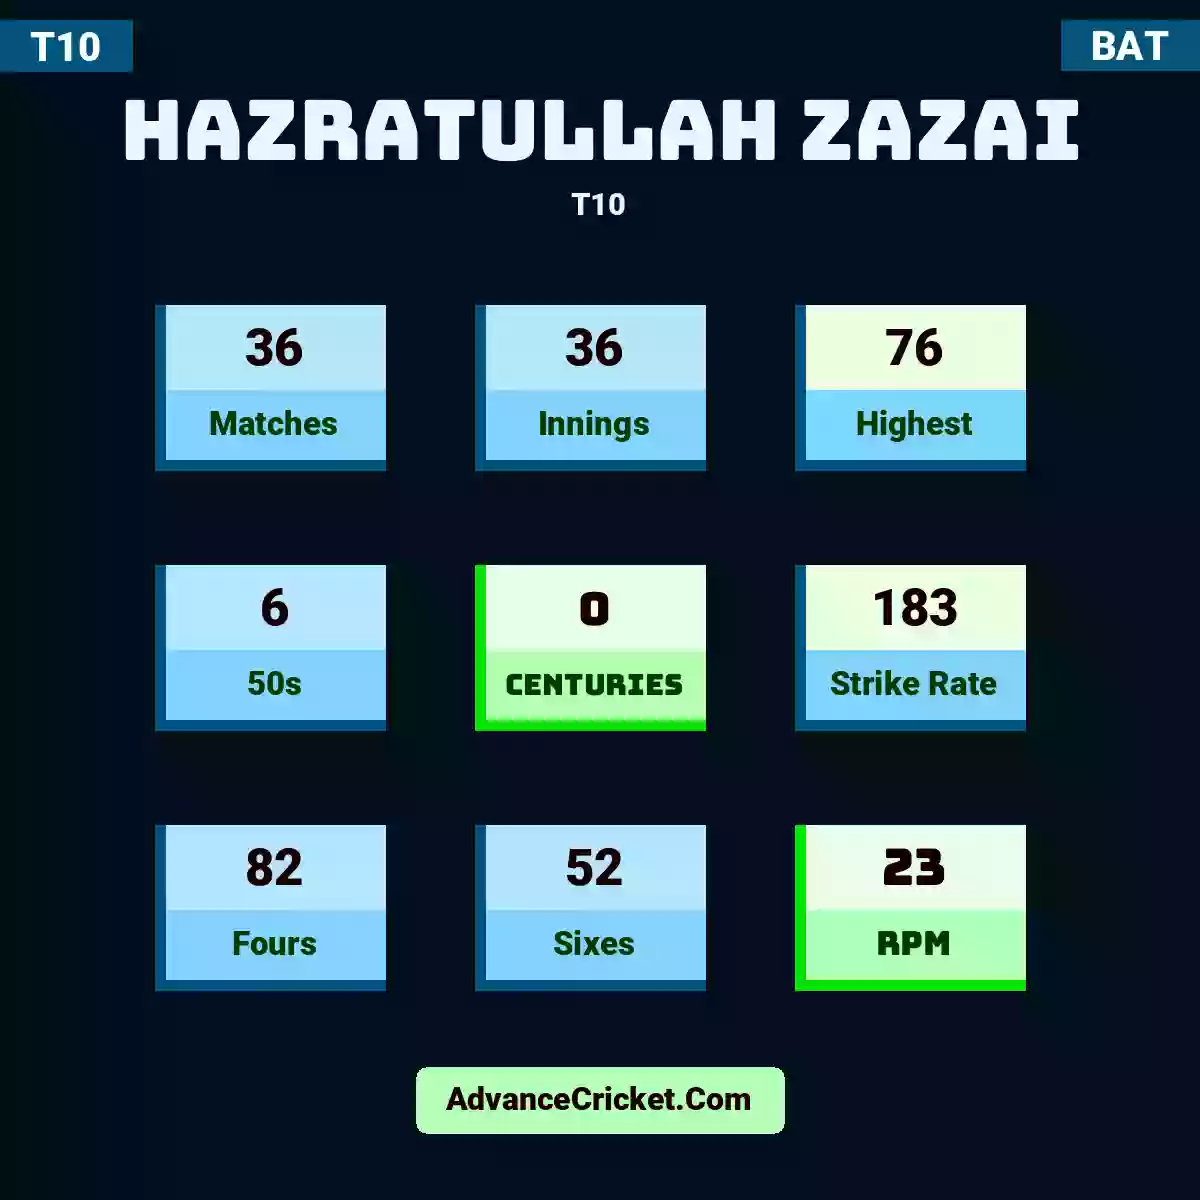 Hazratullah Zazai T10 , Hazratullah Zazai played 36 matches, scored 76 runs as highest, 6 half-centuries, and 0 centuries, with a strike rate of 183. H.Zazai hit 82 fours and 52 sixes, with an RPM of 23.